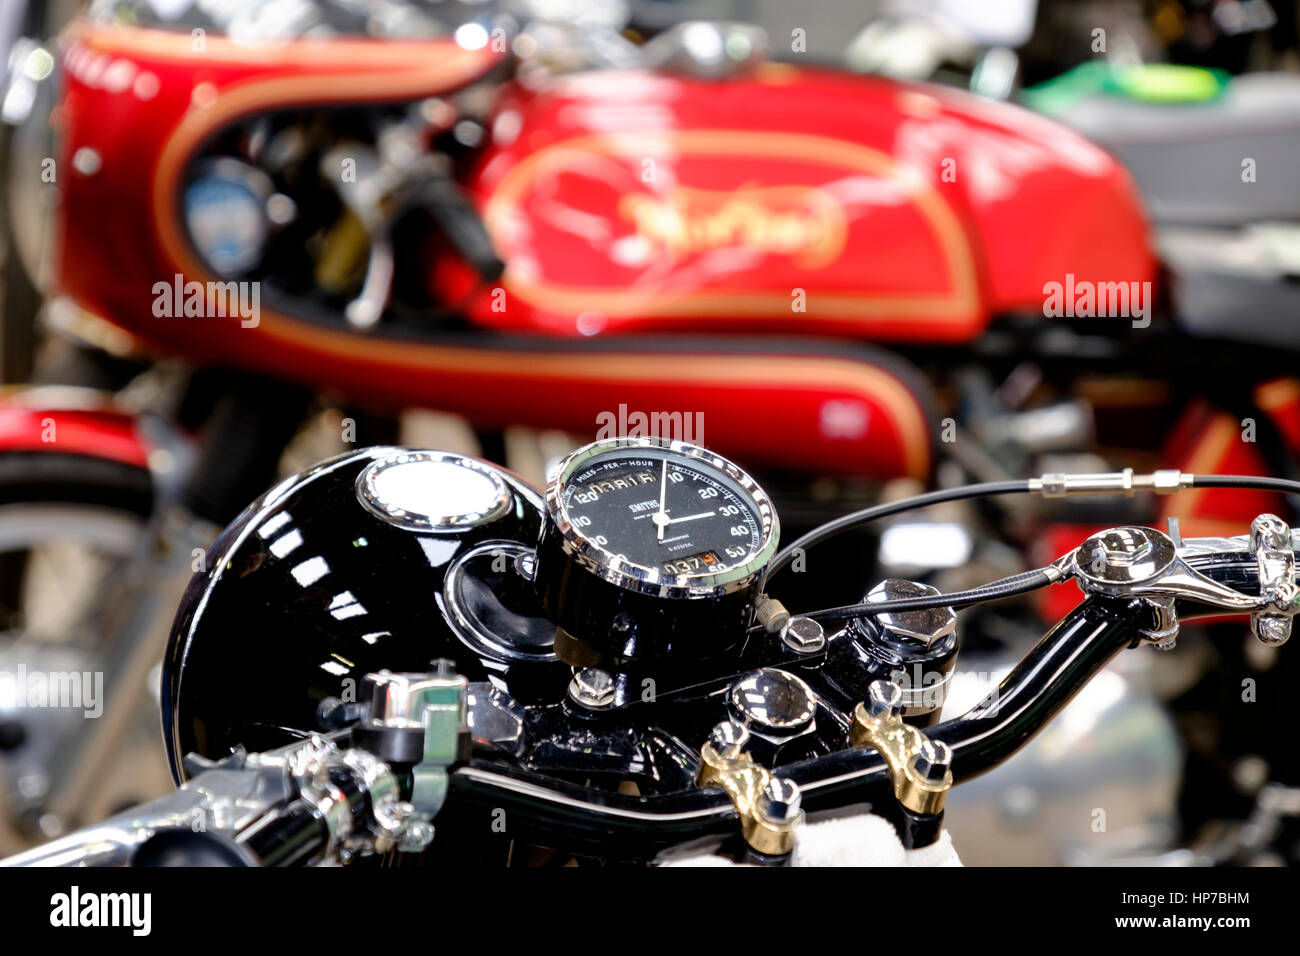 Vincent Speedometer High Resolution Stock Photography and Images - Alamy